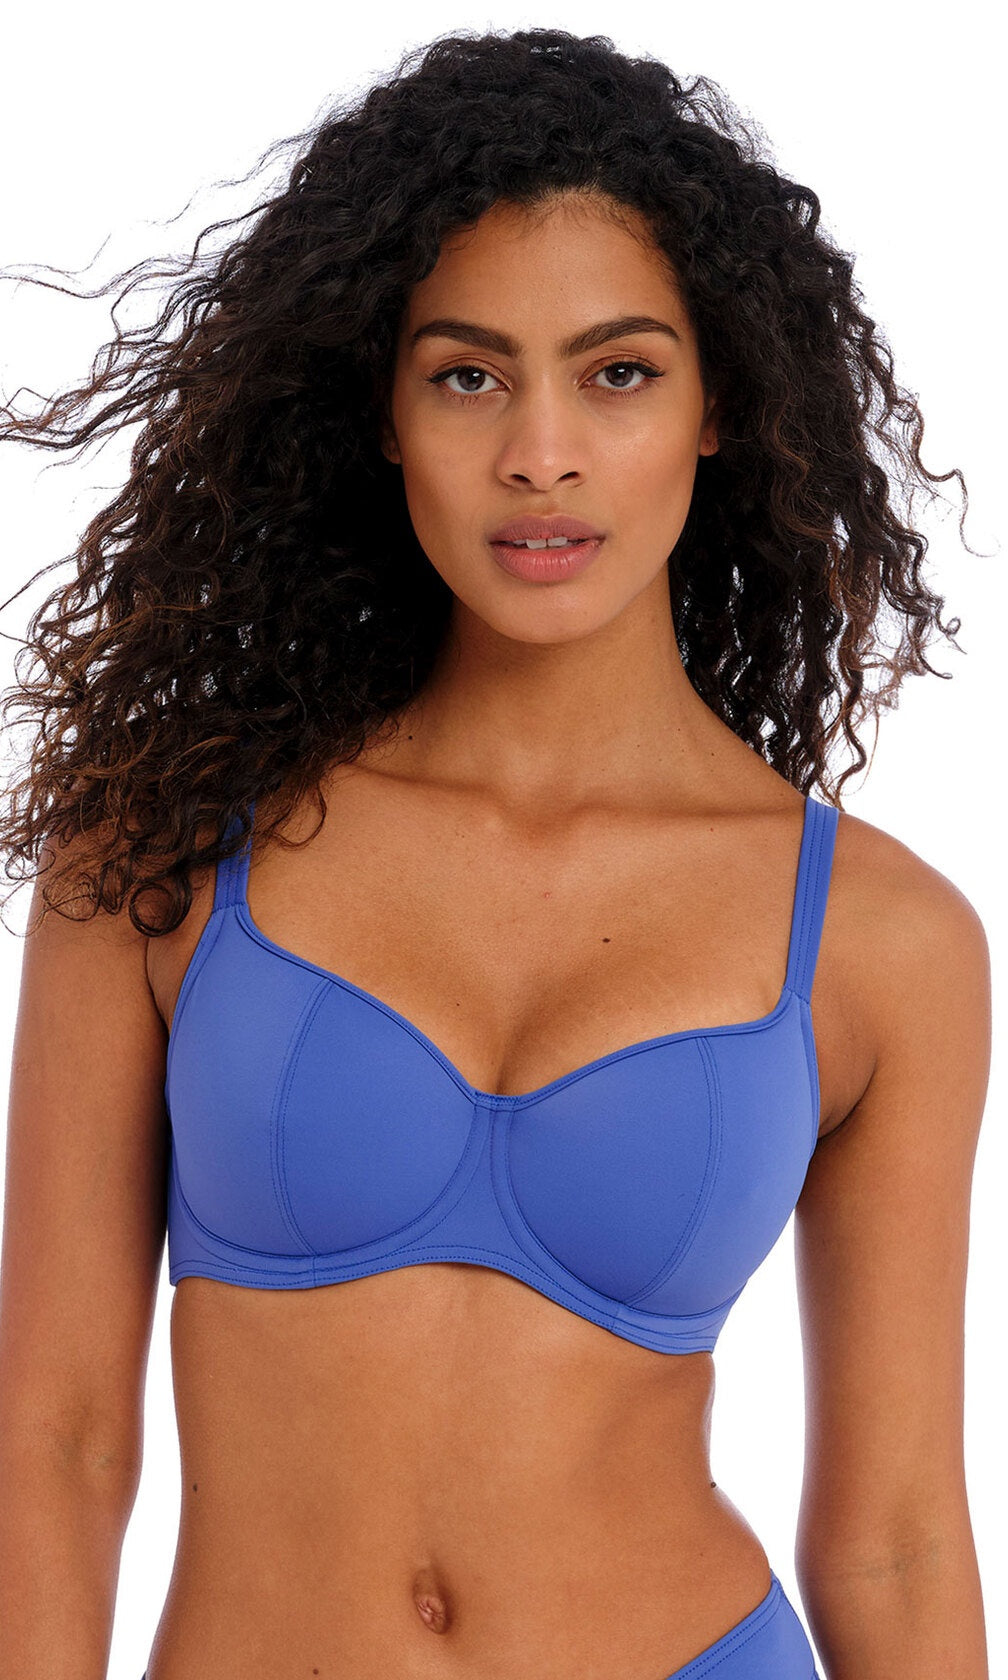 Jewel Cove Plain Azure UW Sweetheart Bikini Top, Special Order D Cup to HH Cup